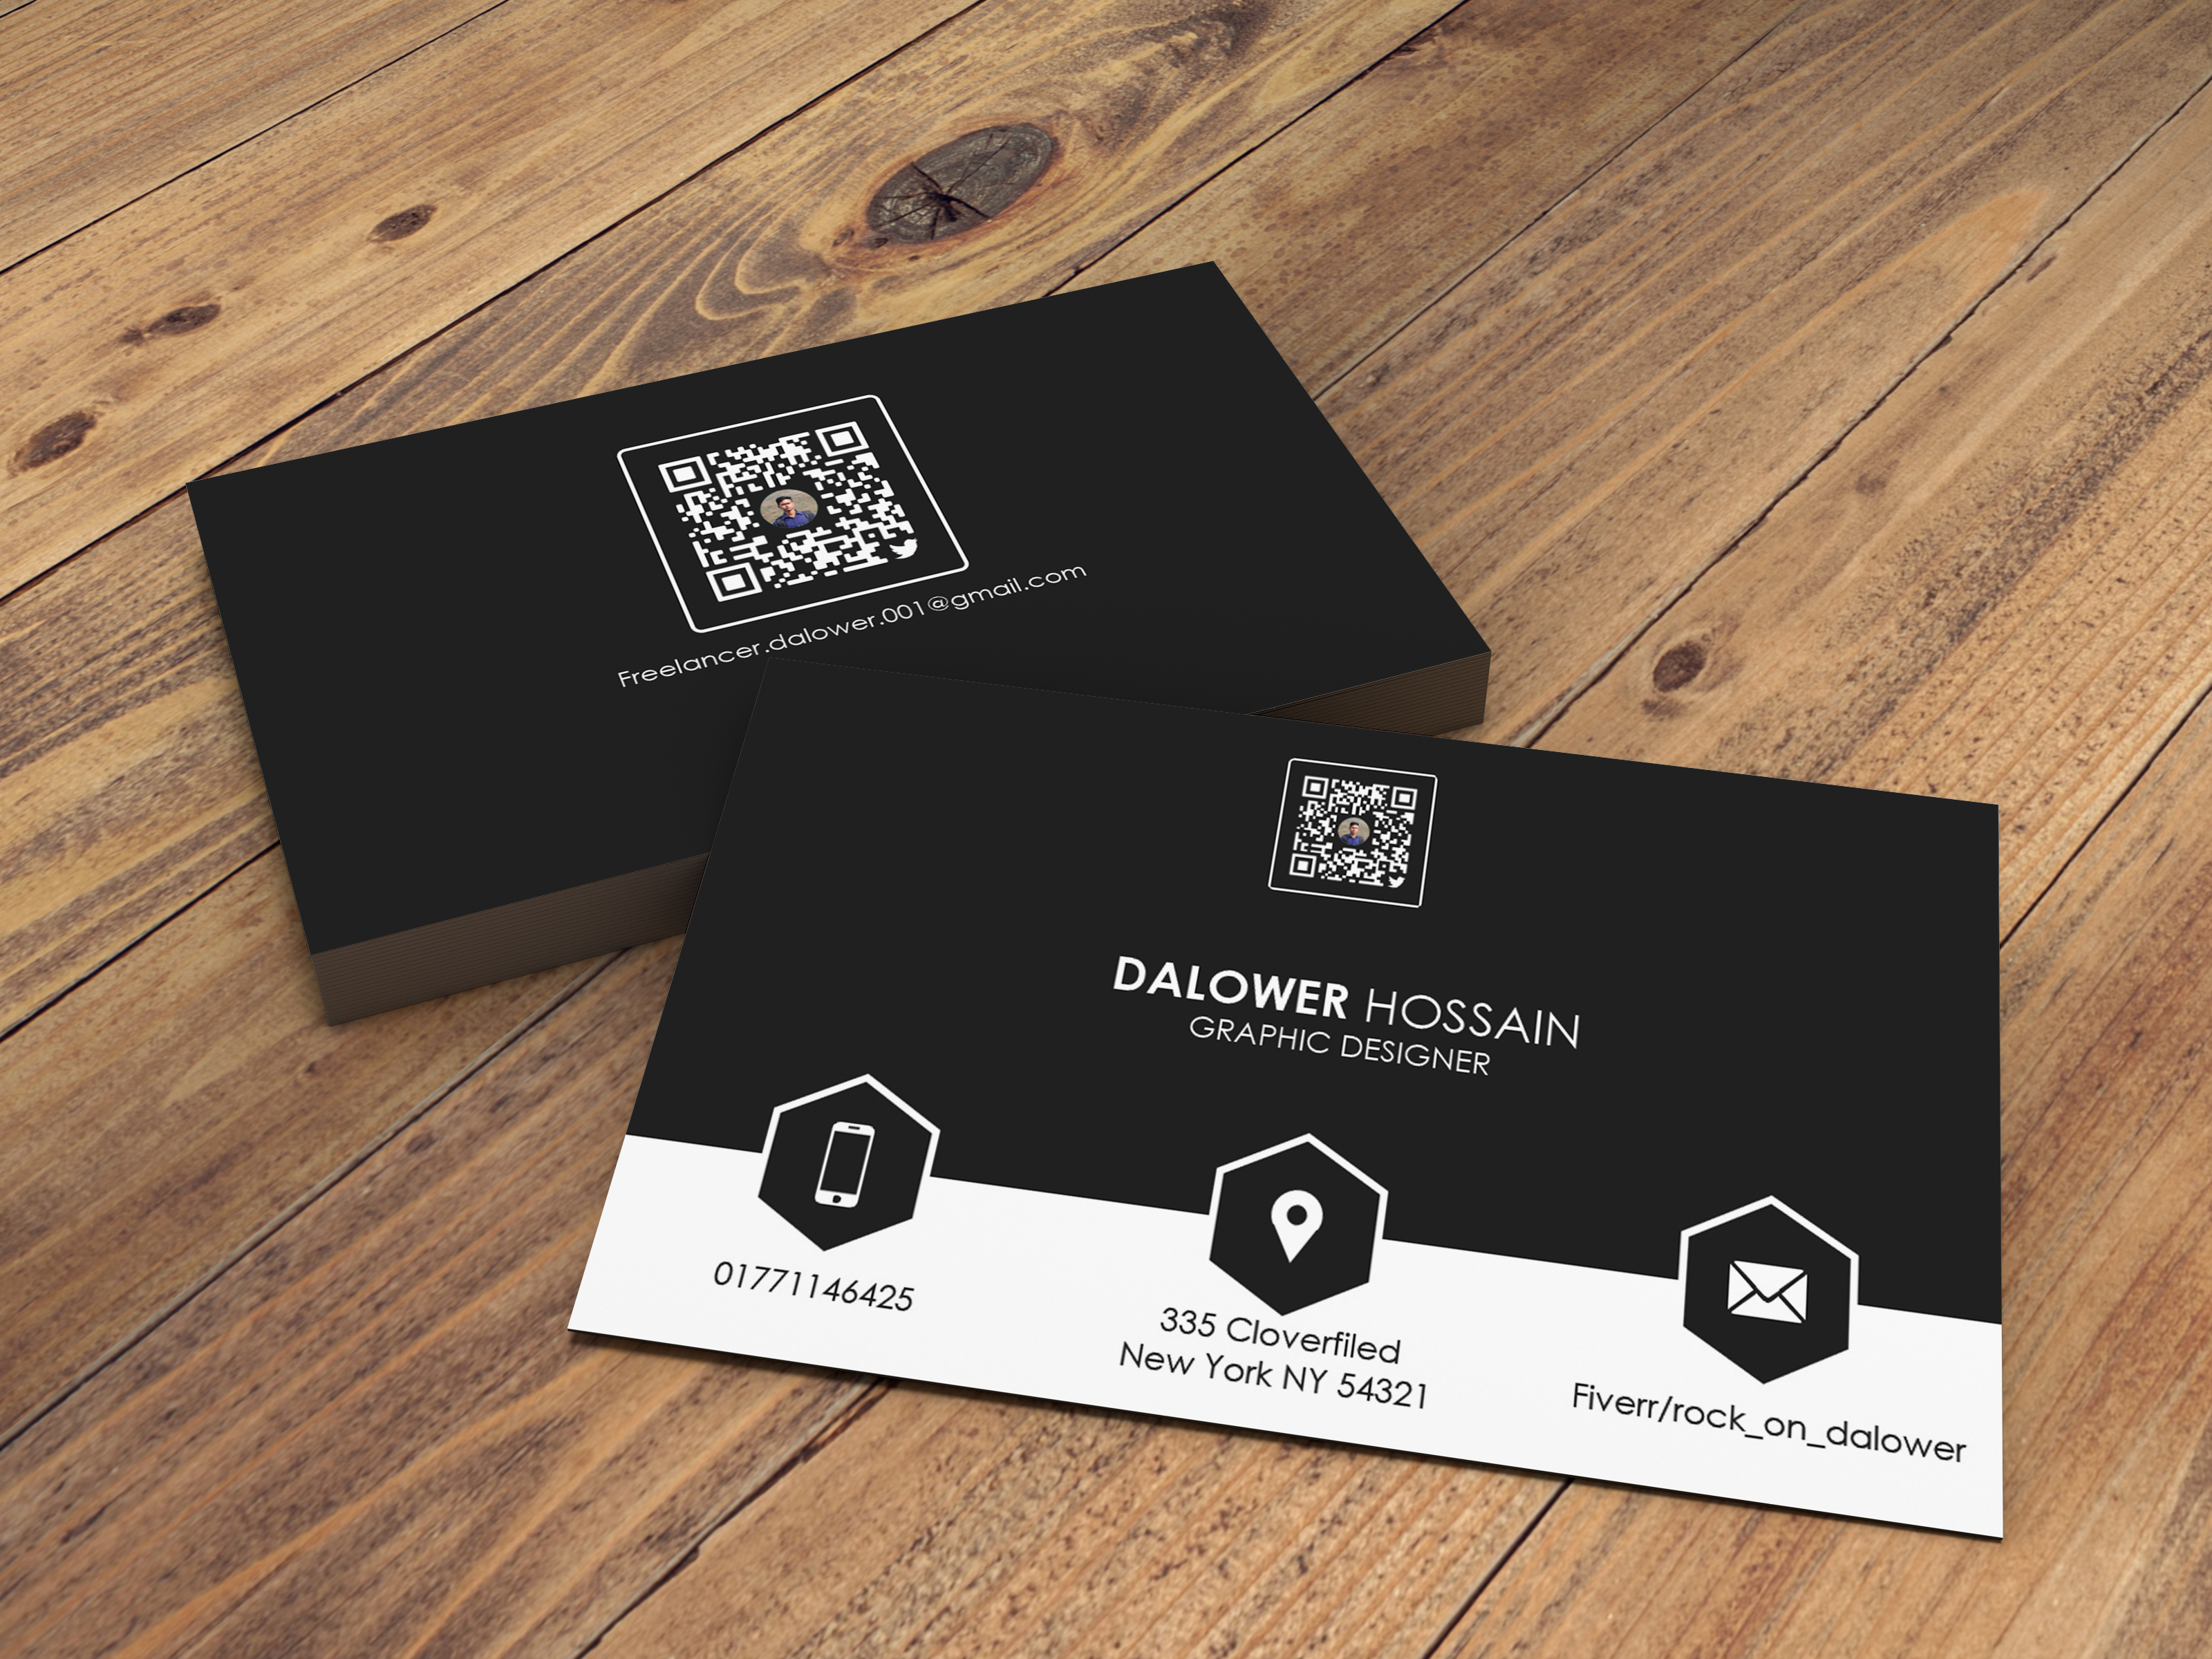 I will design professional business card only 2 days for $15 - SEOClerks